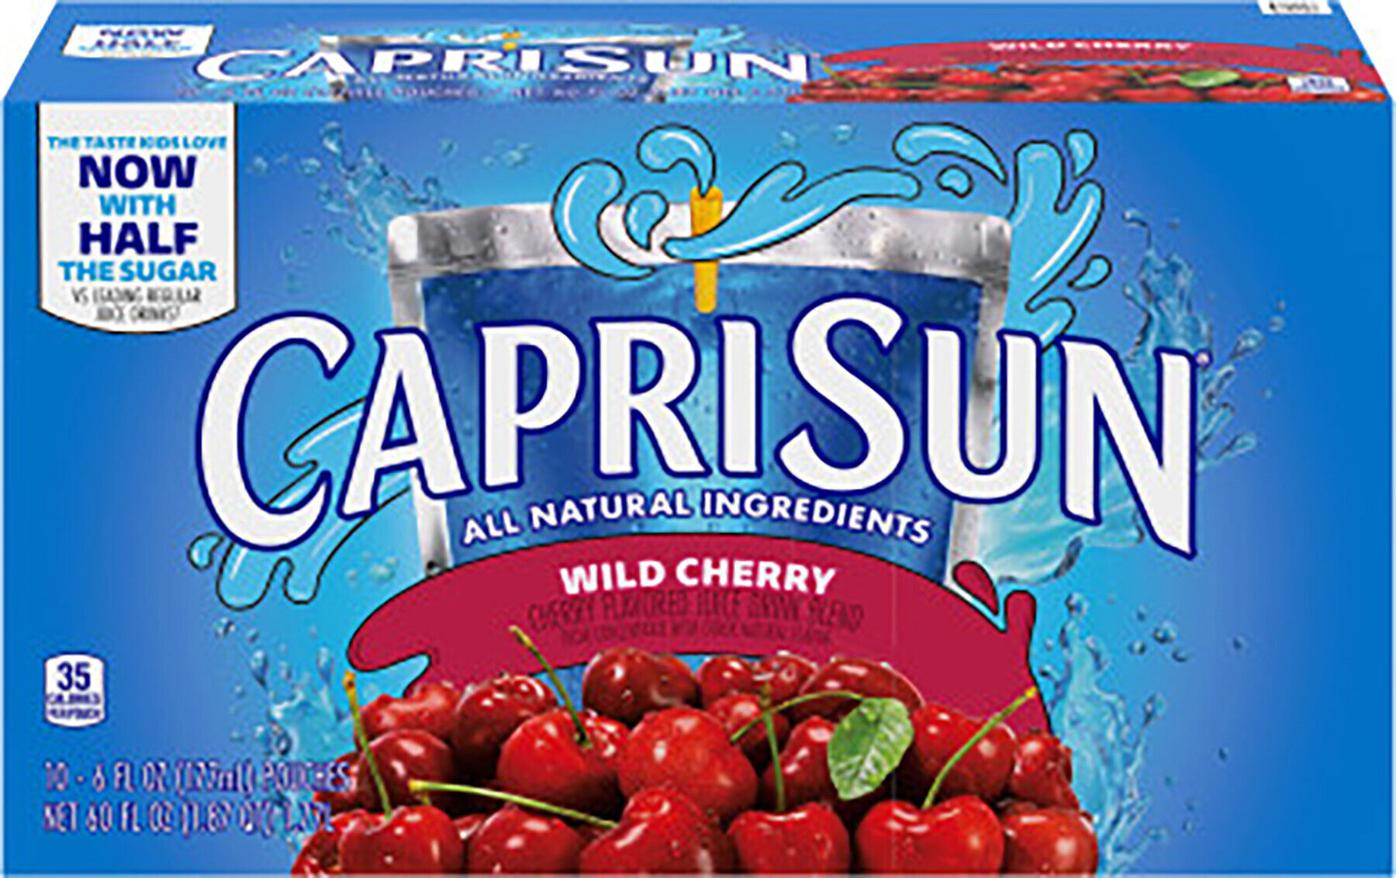 Capri Sun Juice Could Contain Cleaning Solution